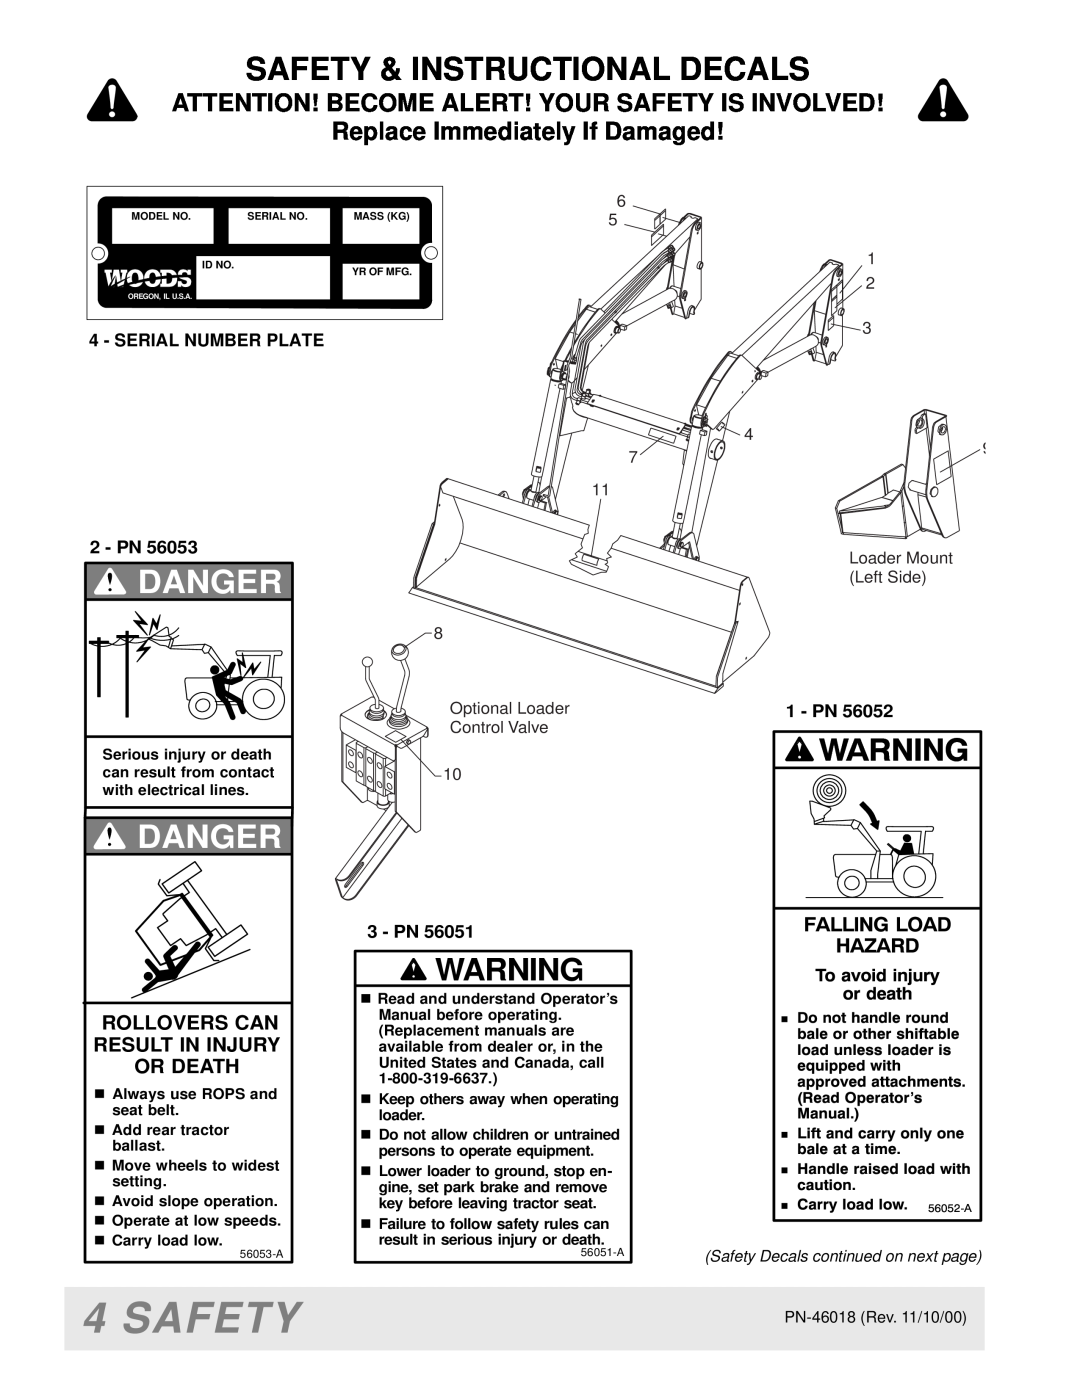 Woods Equipment M8200 Safety & Instructional Decals, Replace Immediately If Damaged, Danger, Rollovers Can, Or Death 